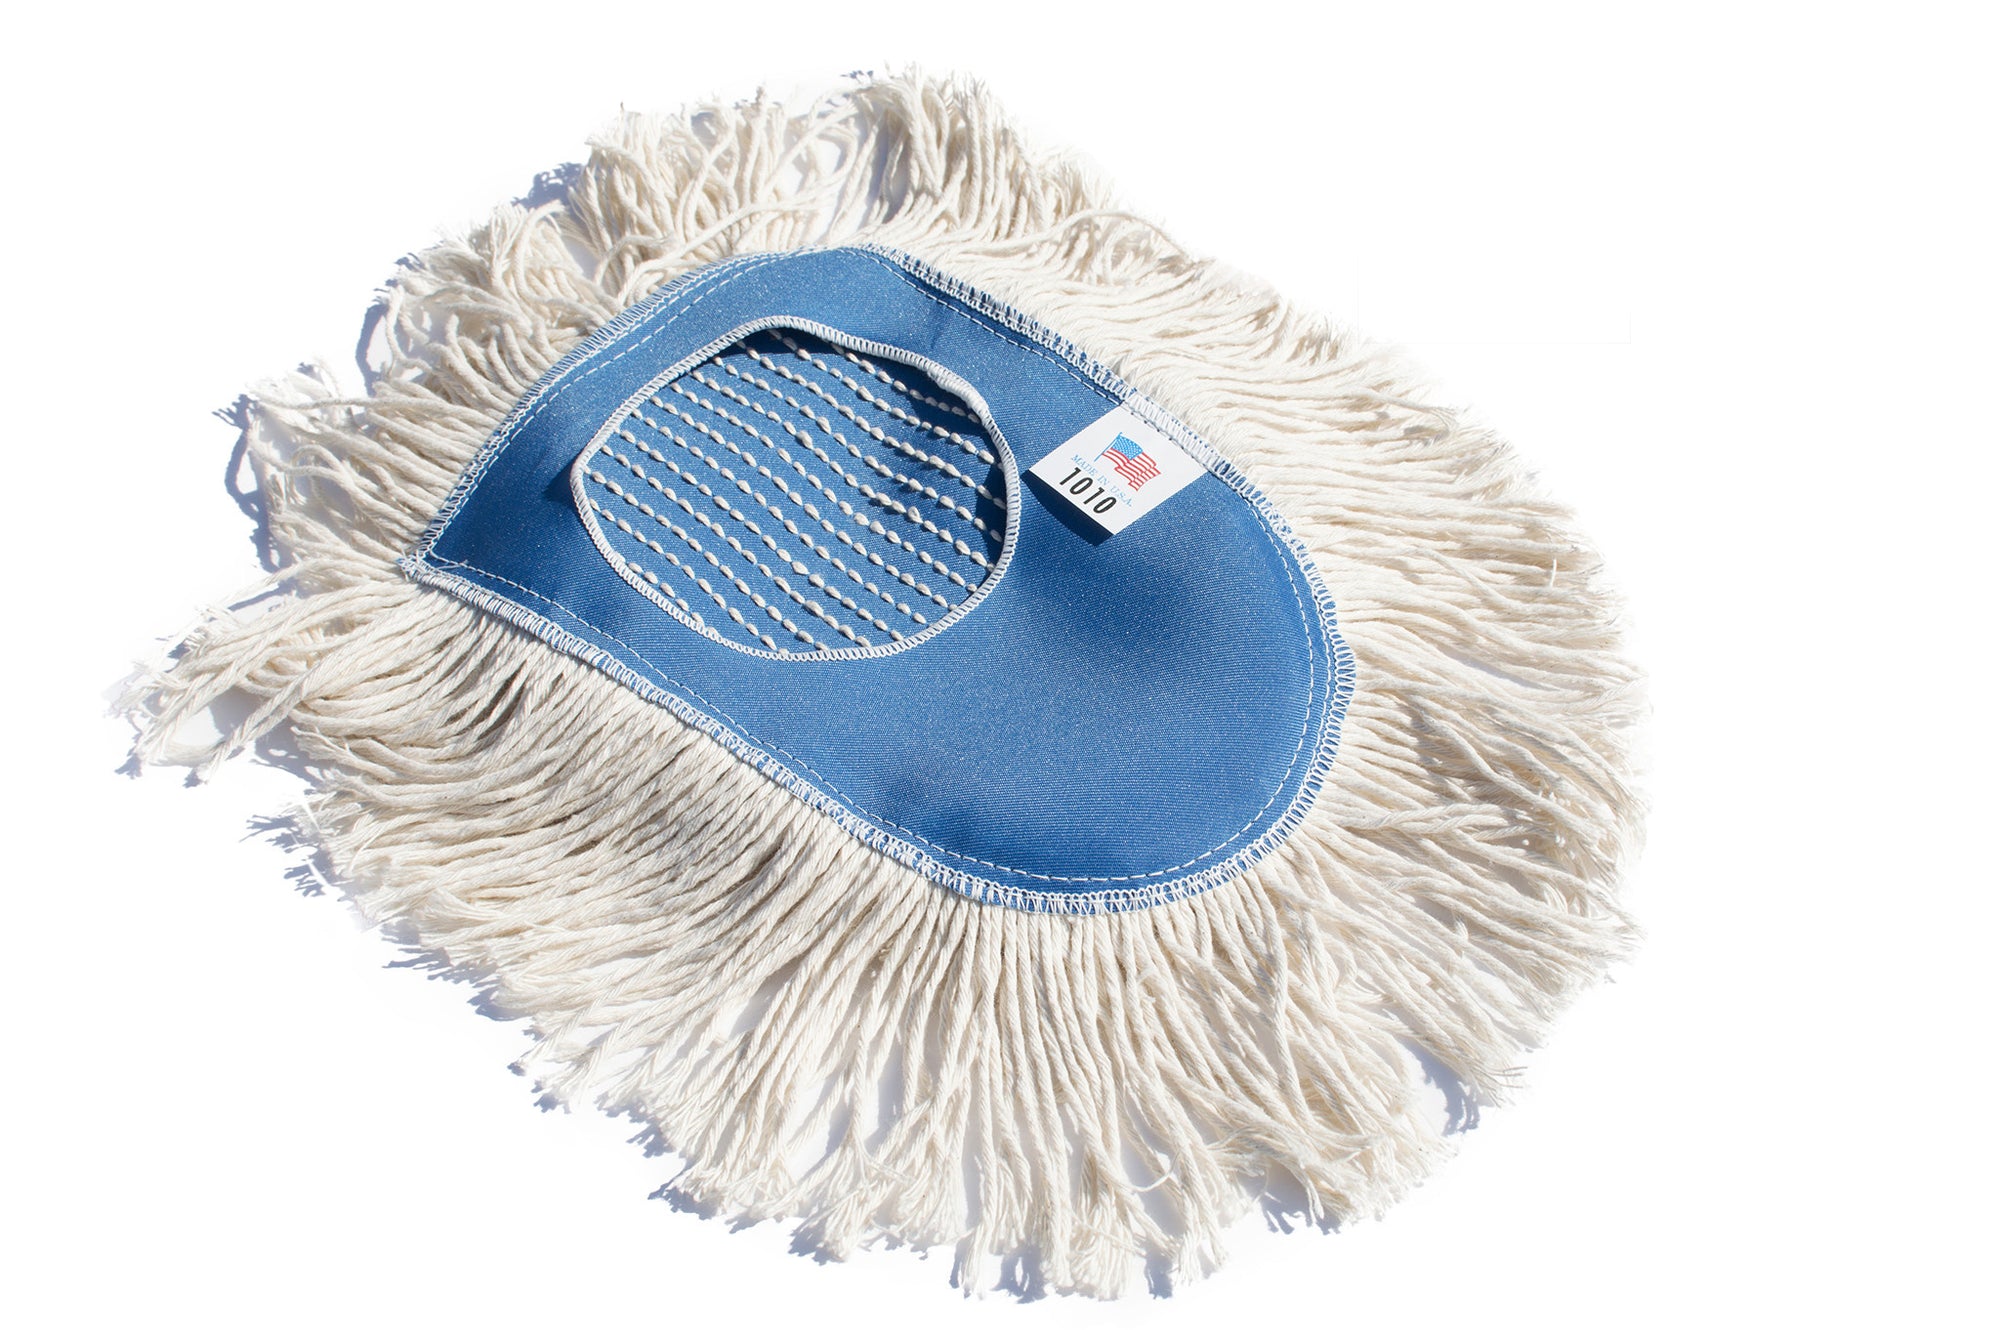 MaxiDust™ Wedge Cotton Looped End Dust Mop Kits #96002 (Mops